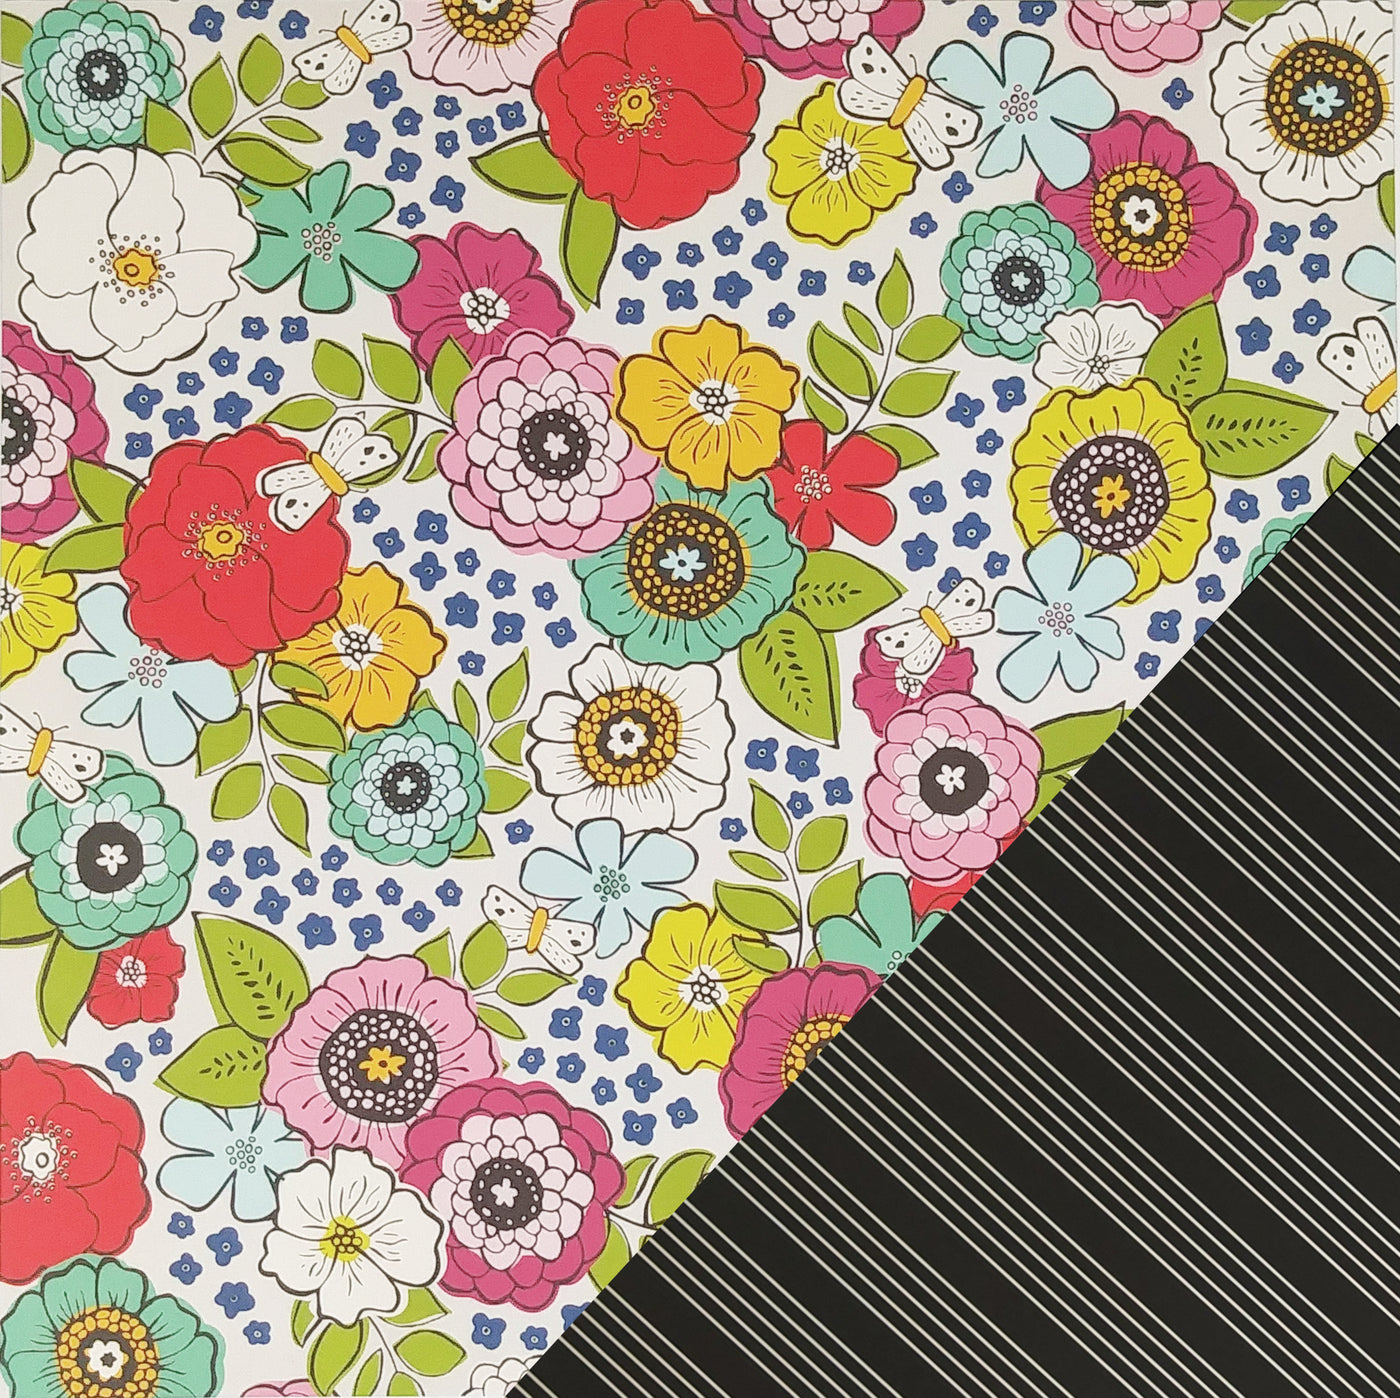 ORCHARD STREET - 12x12 Double-Sided Patterned Paper - American Crafts